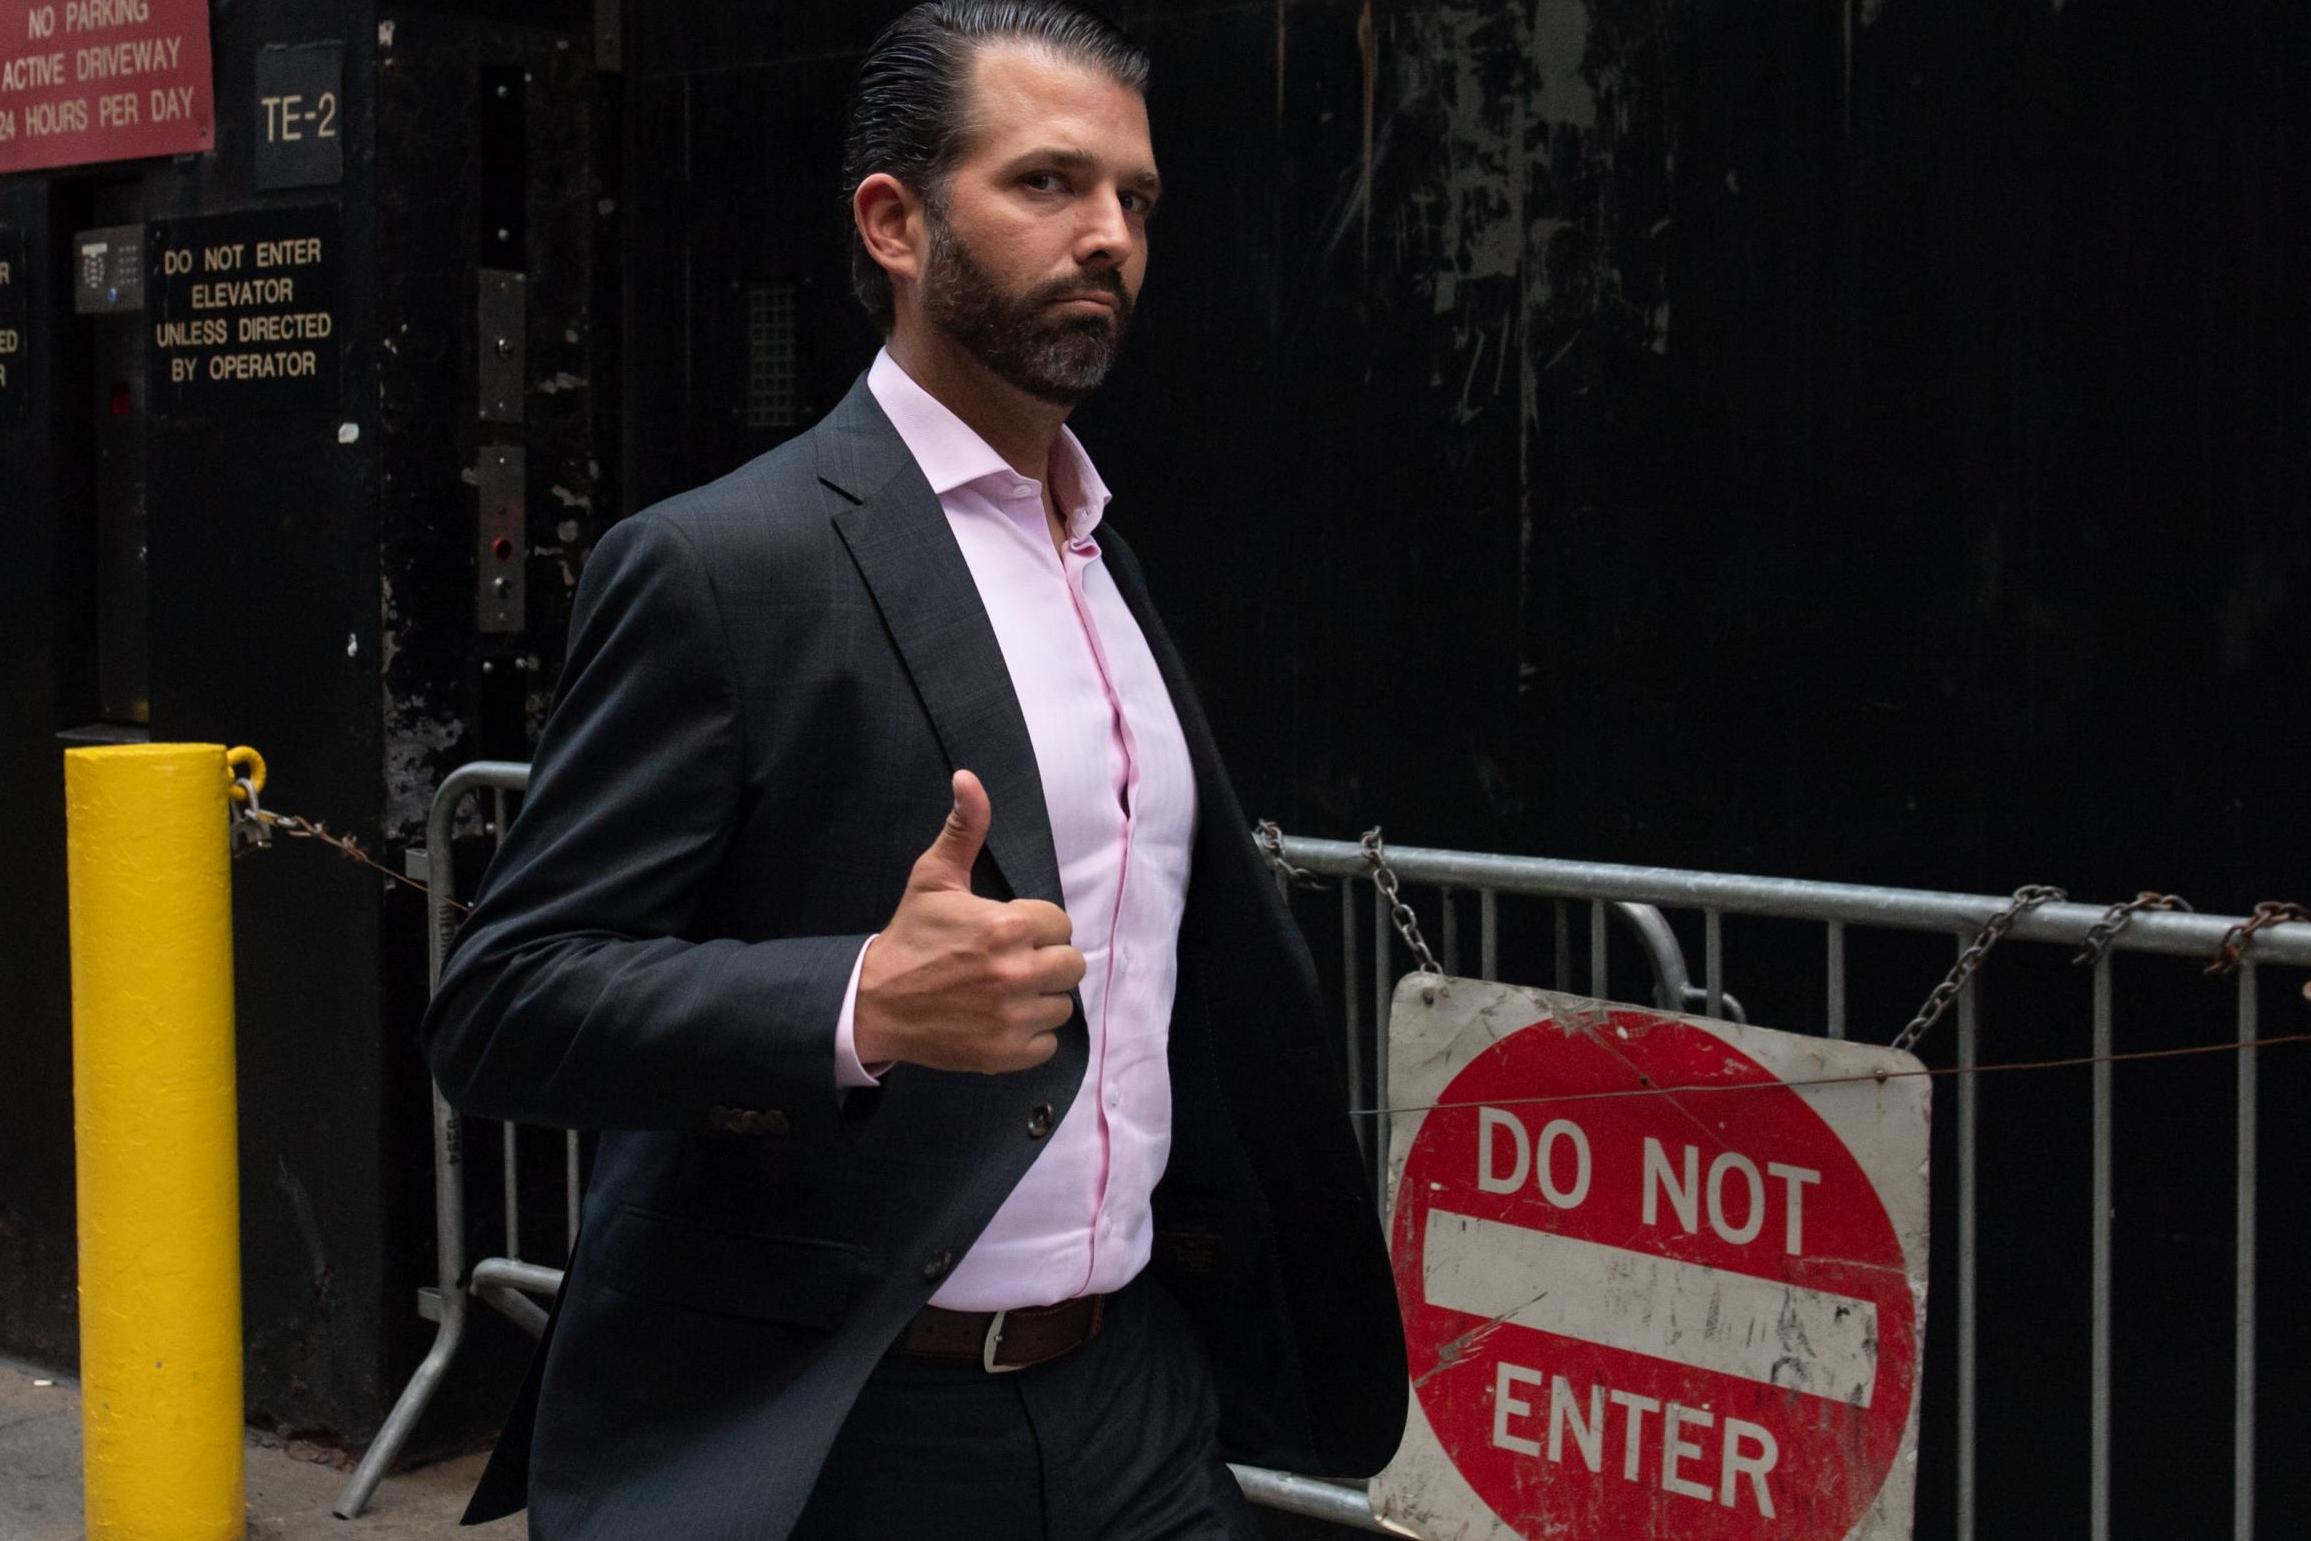 Donald Trump, Jr, son of President Donald Trump, gives a thumbs-up as he walks outside of Trump Tower in New York on 24 September, 2019.